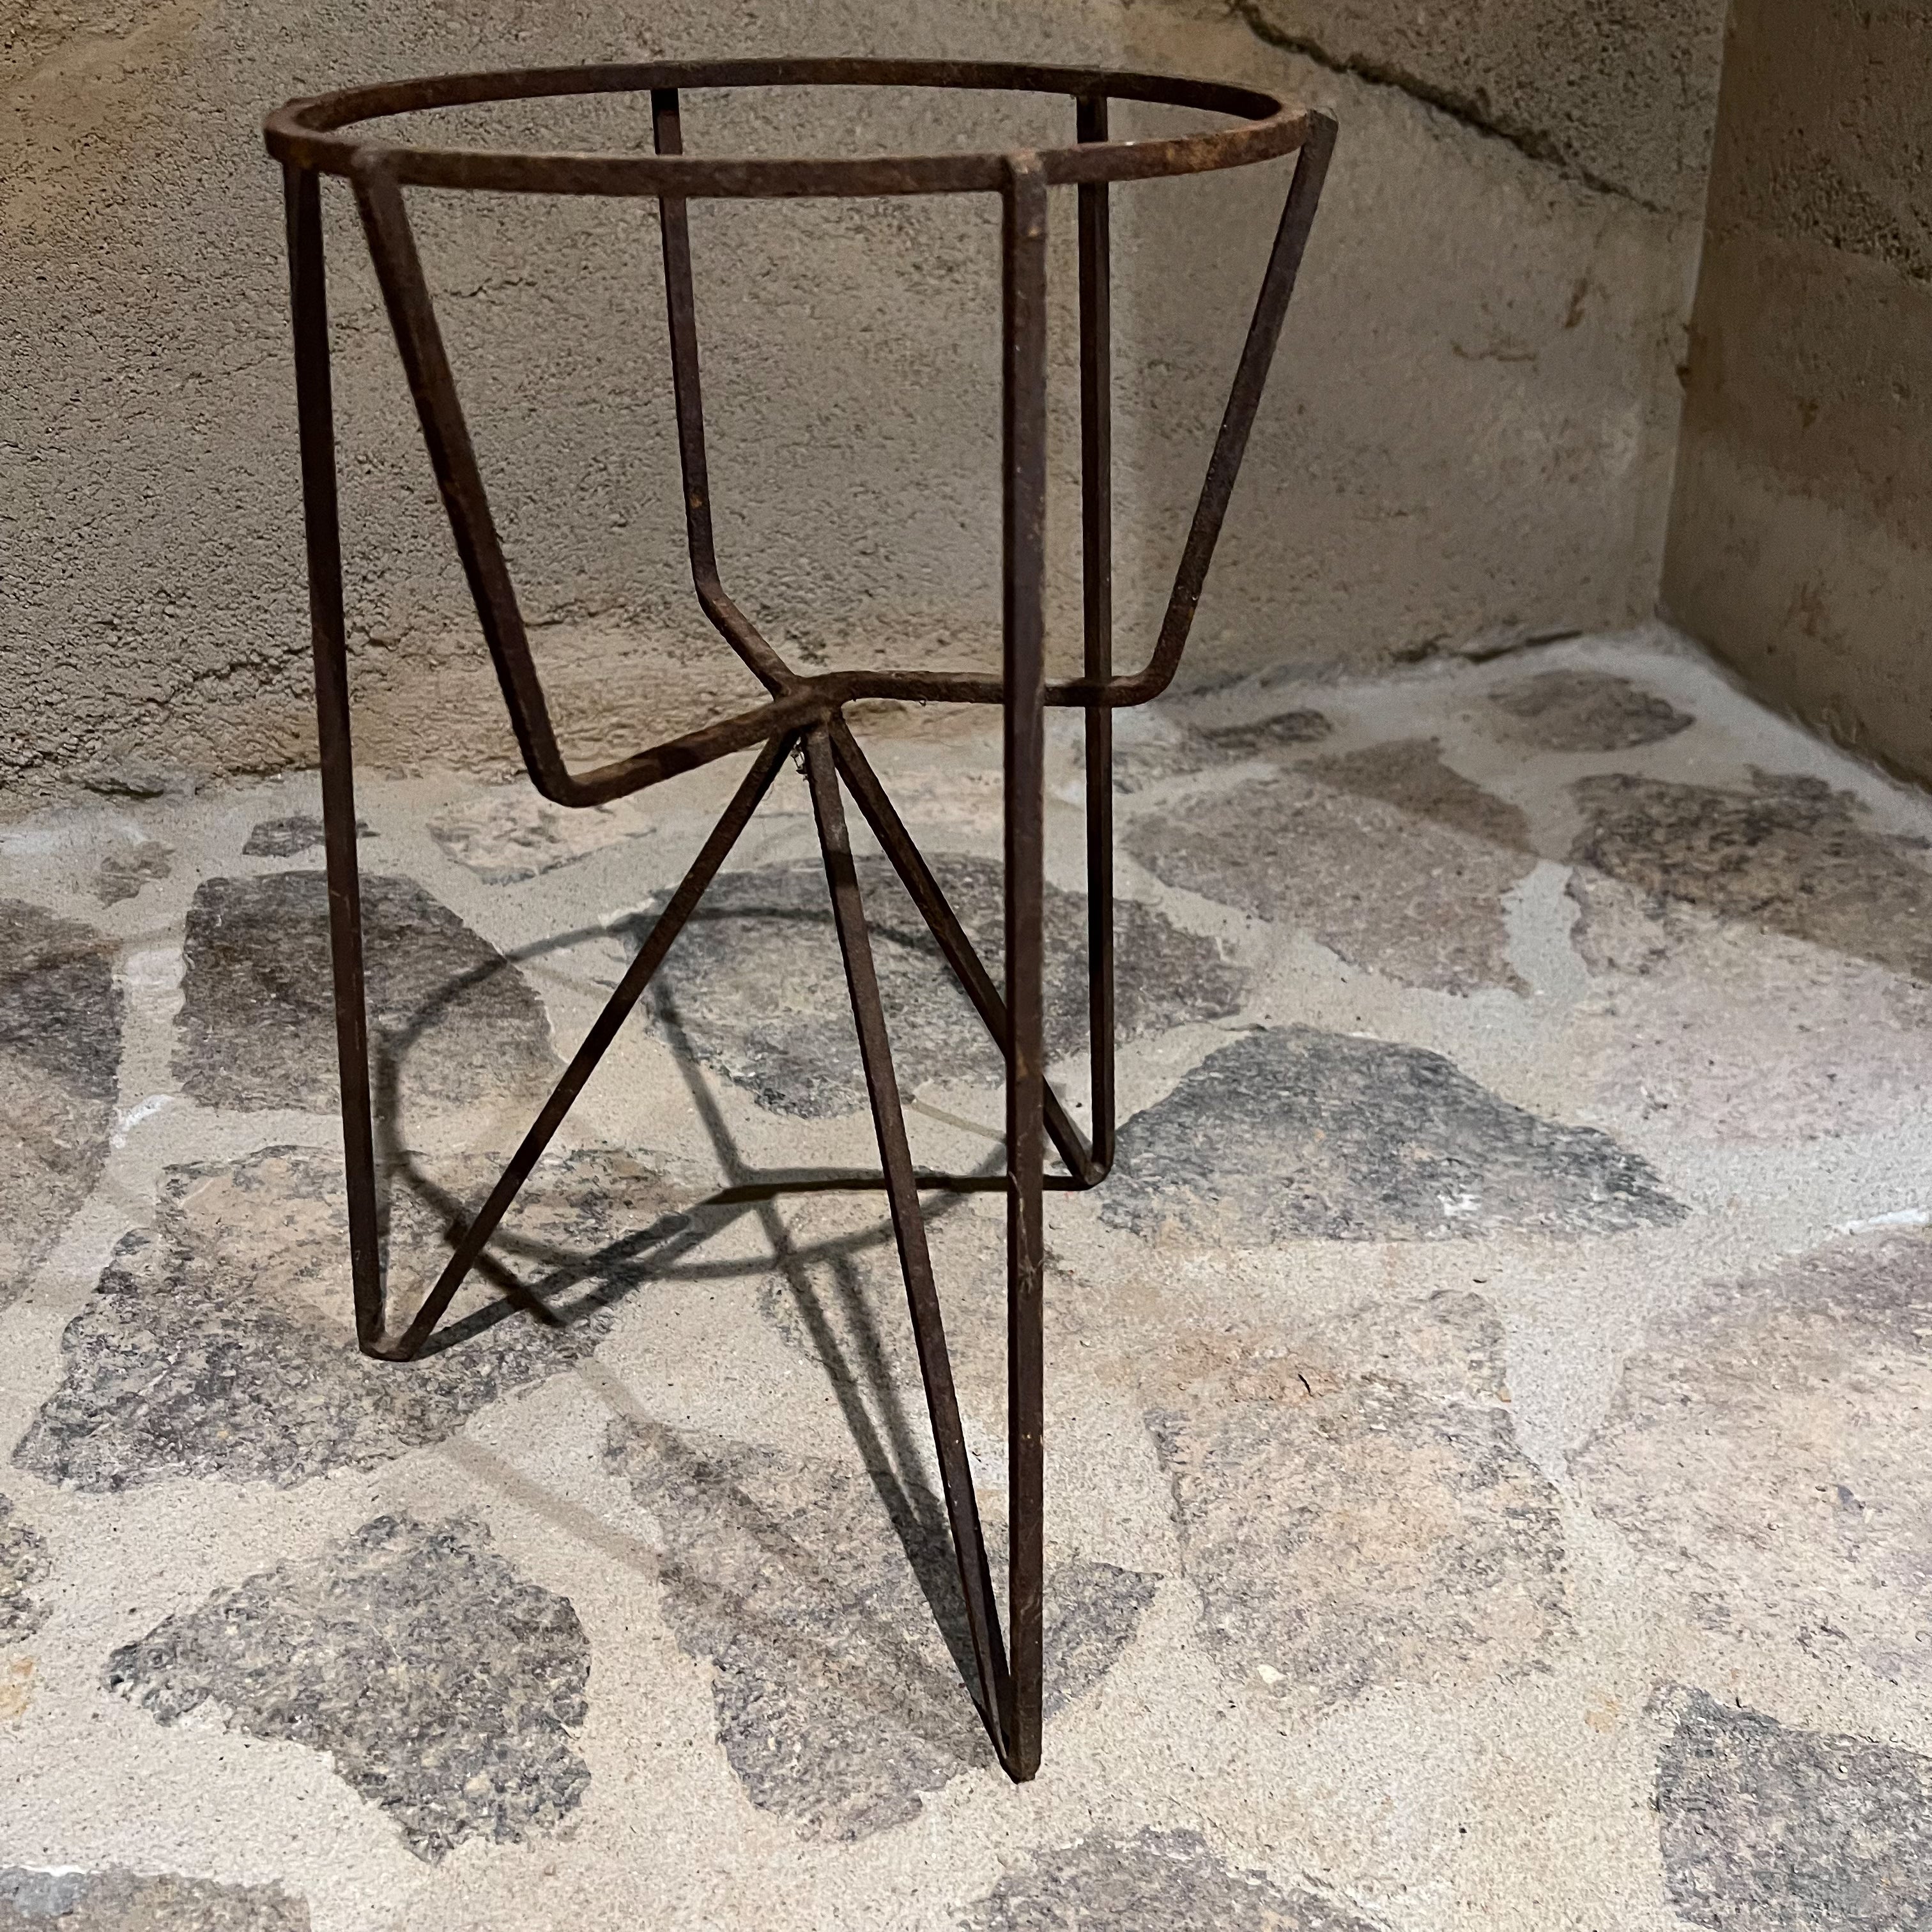 Mid-Century Modern rusty iron planter pedestal stand with tripod legs.
15.25 tall x 13 in diameter fits 7 in diameter planter
Condition is rusted not new. Vintage unrestored condition with patina.
See images provided please.